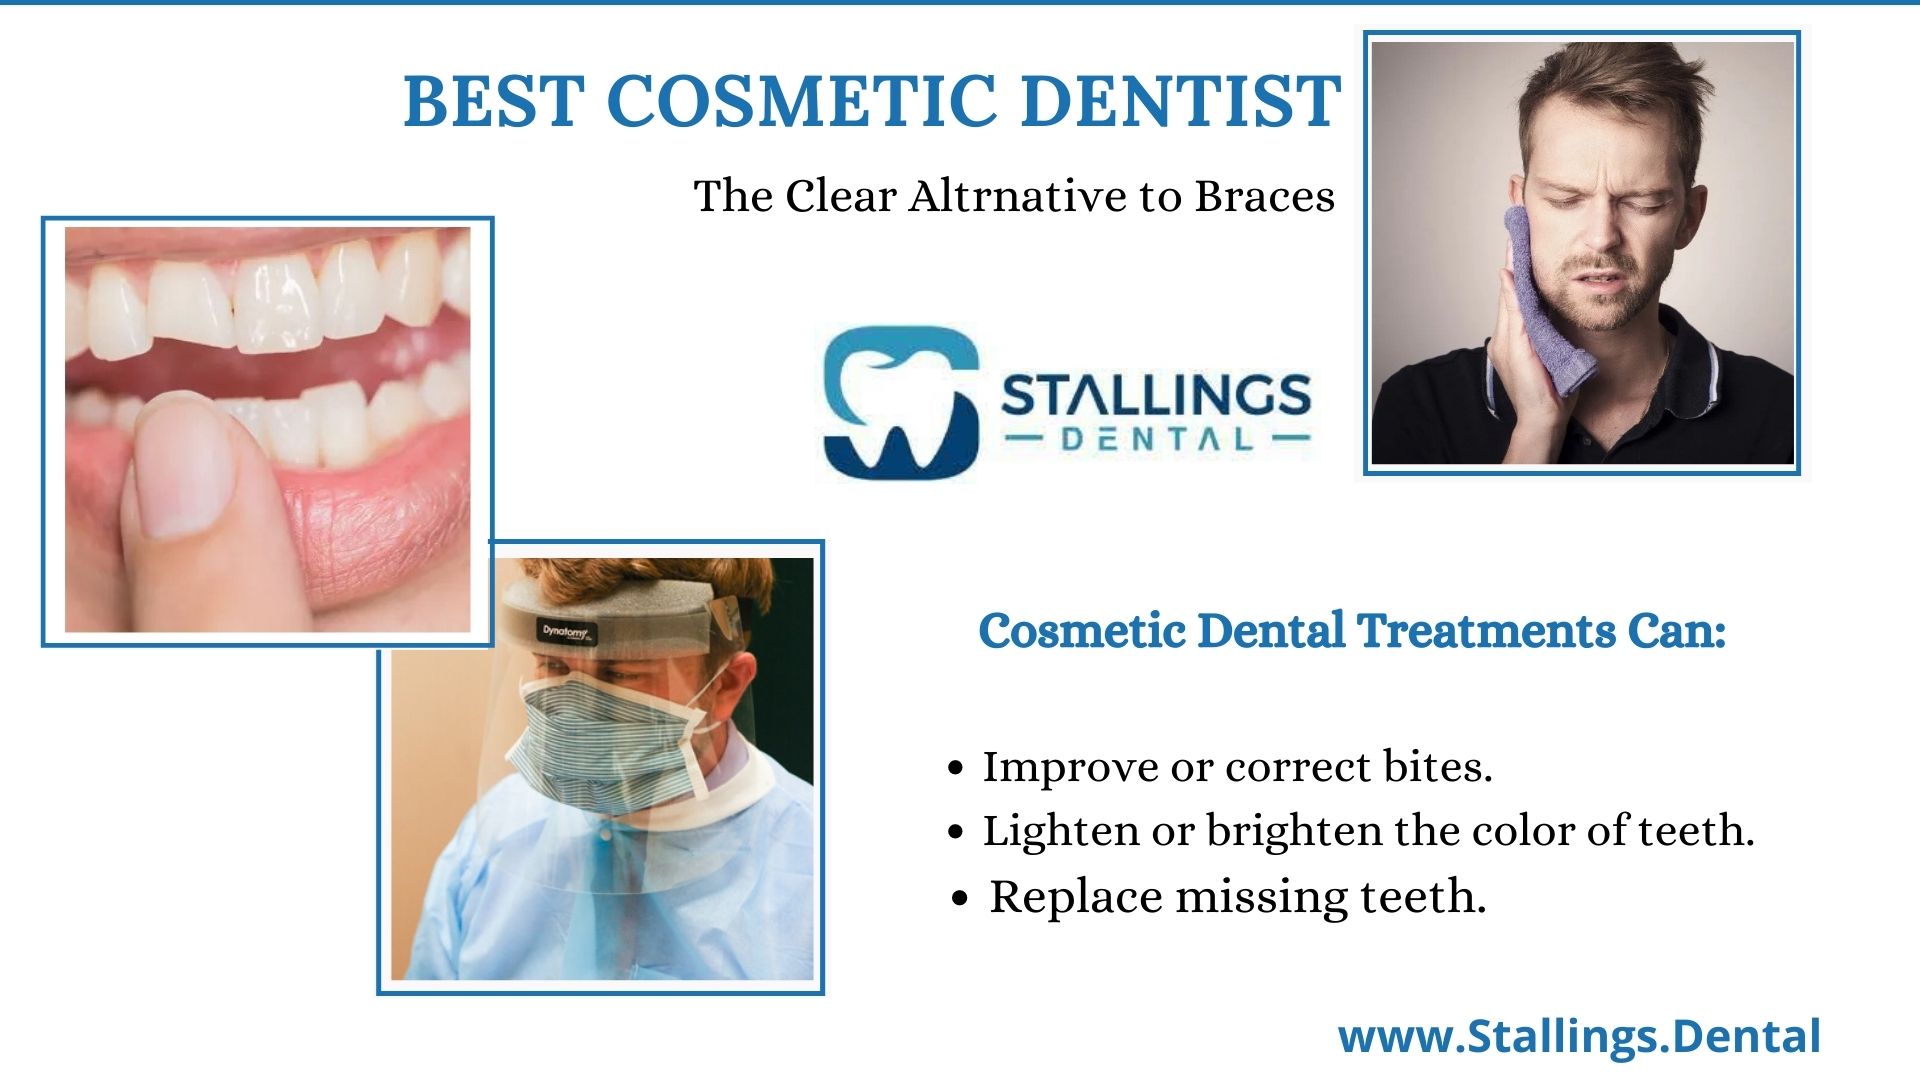 Visit the Best Cosmetic Dentist nearby regularly for a beautiful smile